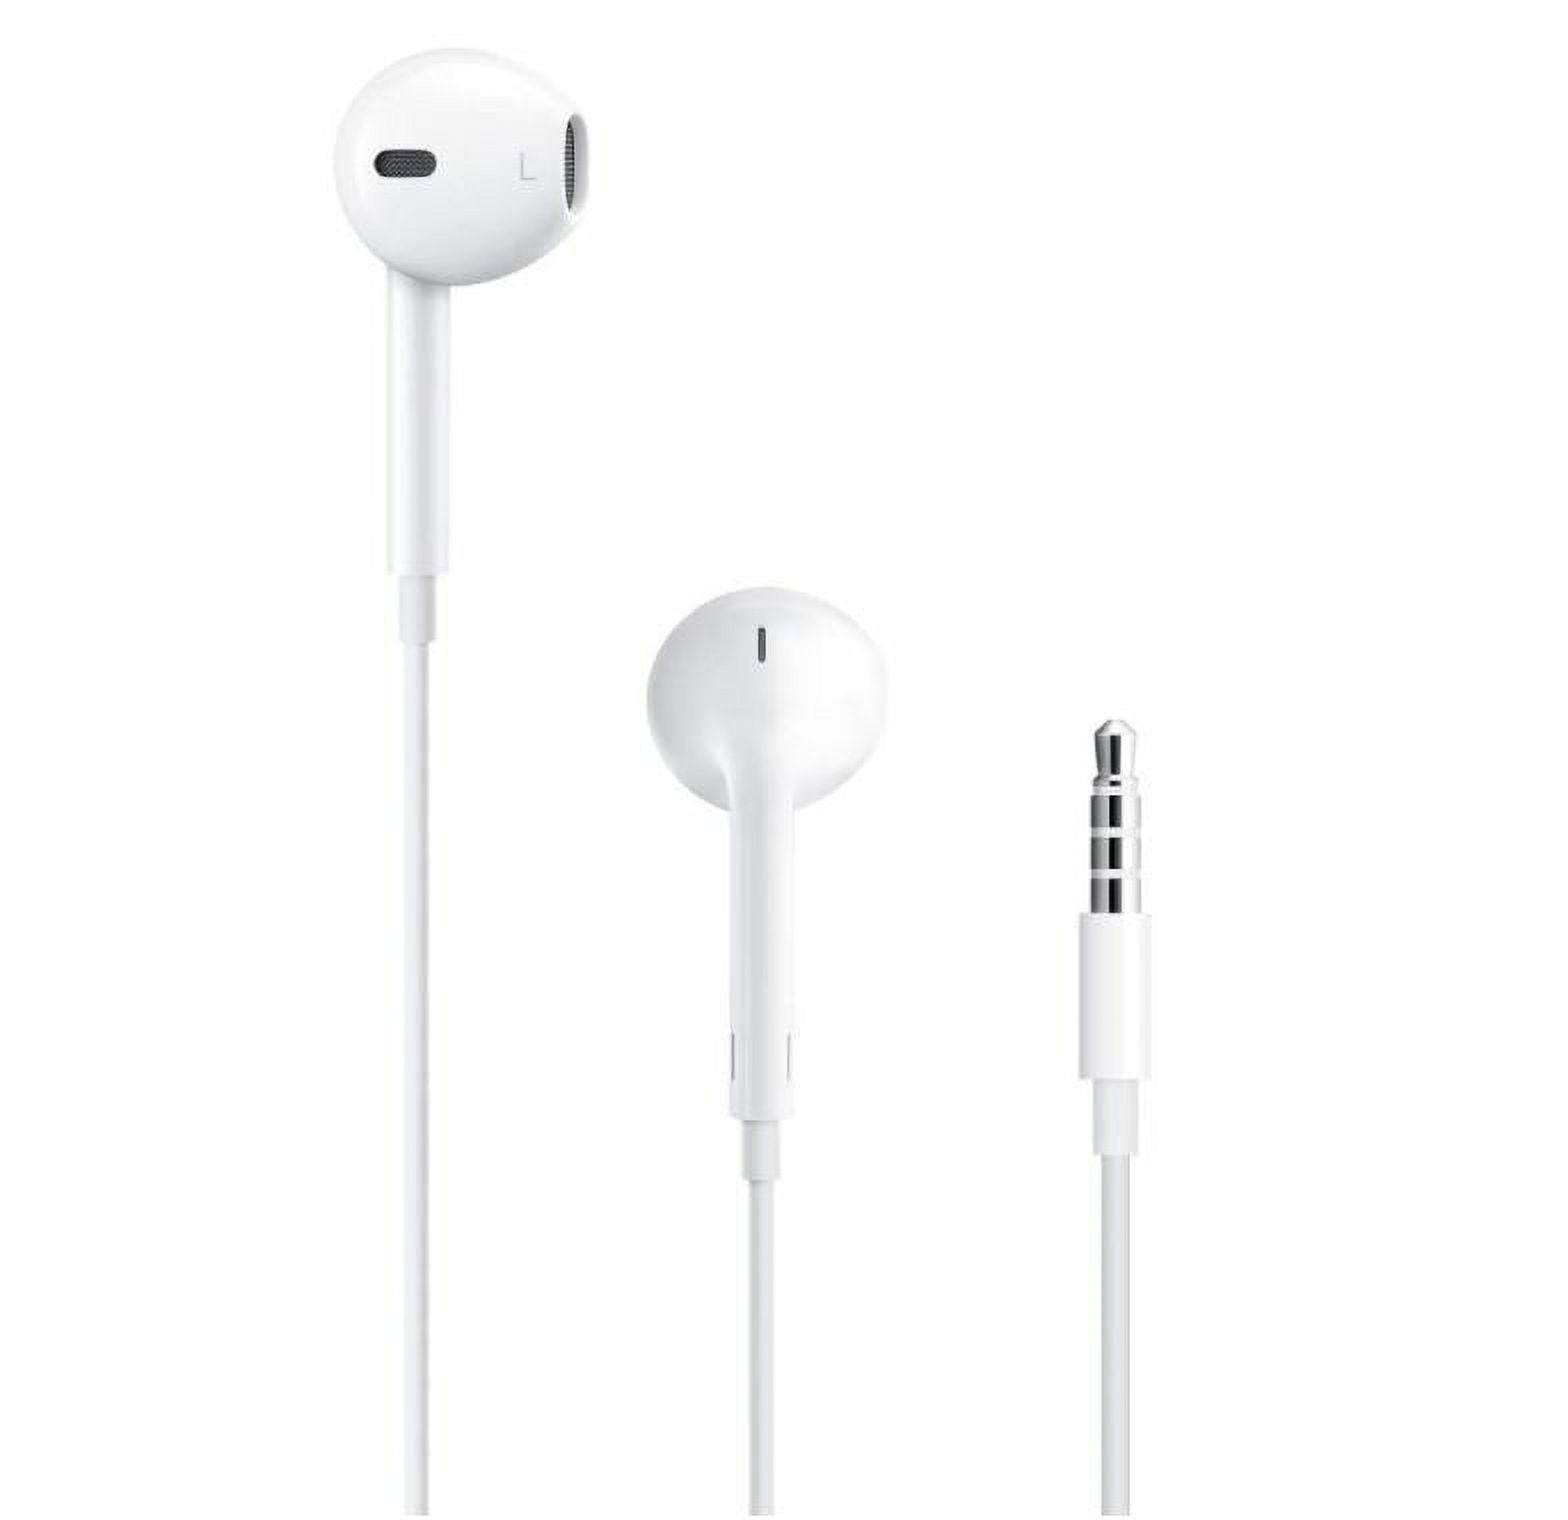 Apple In-Ear Headphones, White, MD827LL/A - image 1 of 4